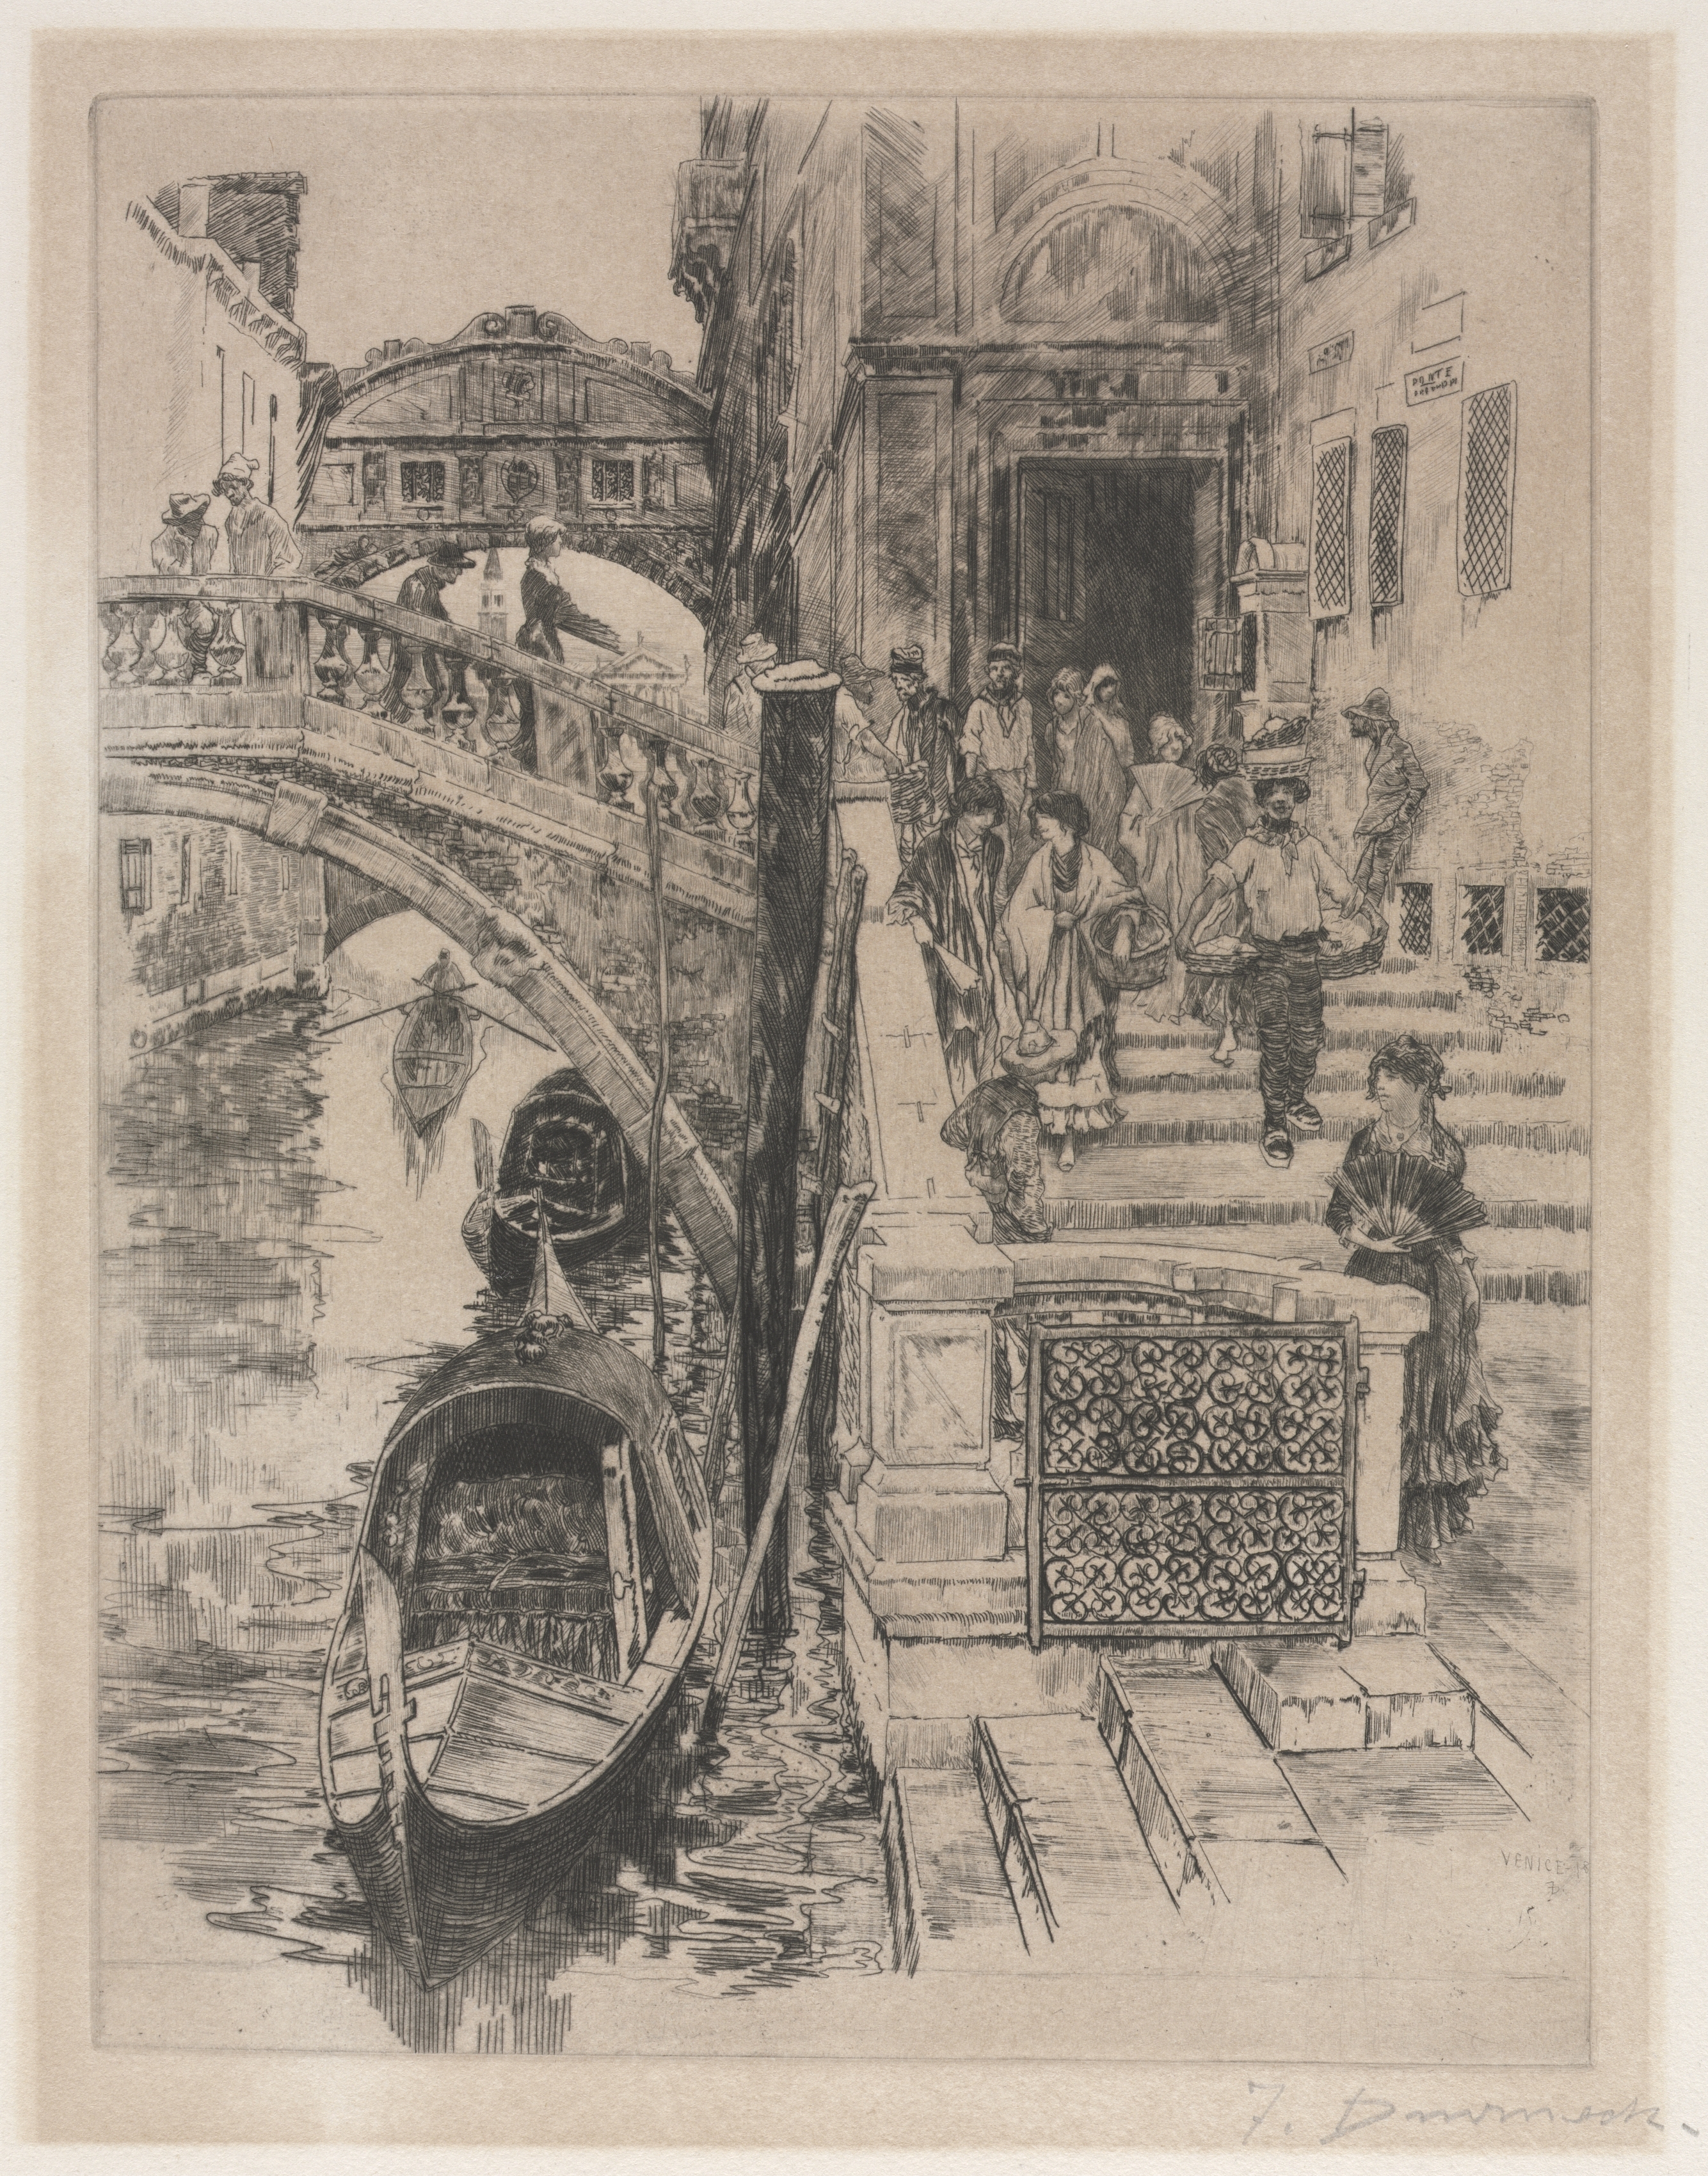 The Bridge of Sighs (second plate)